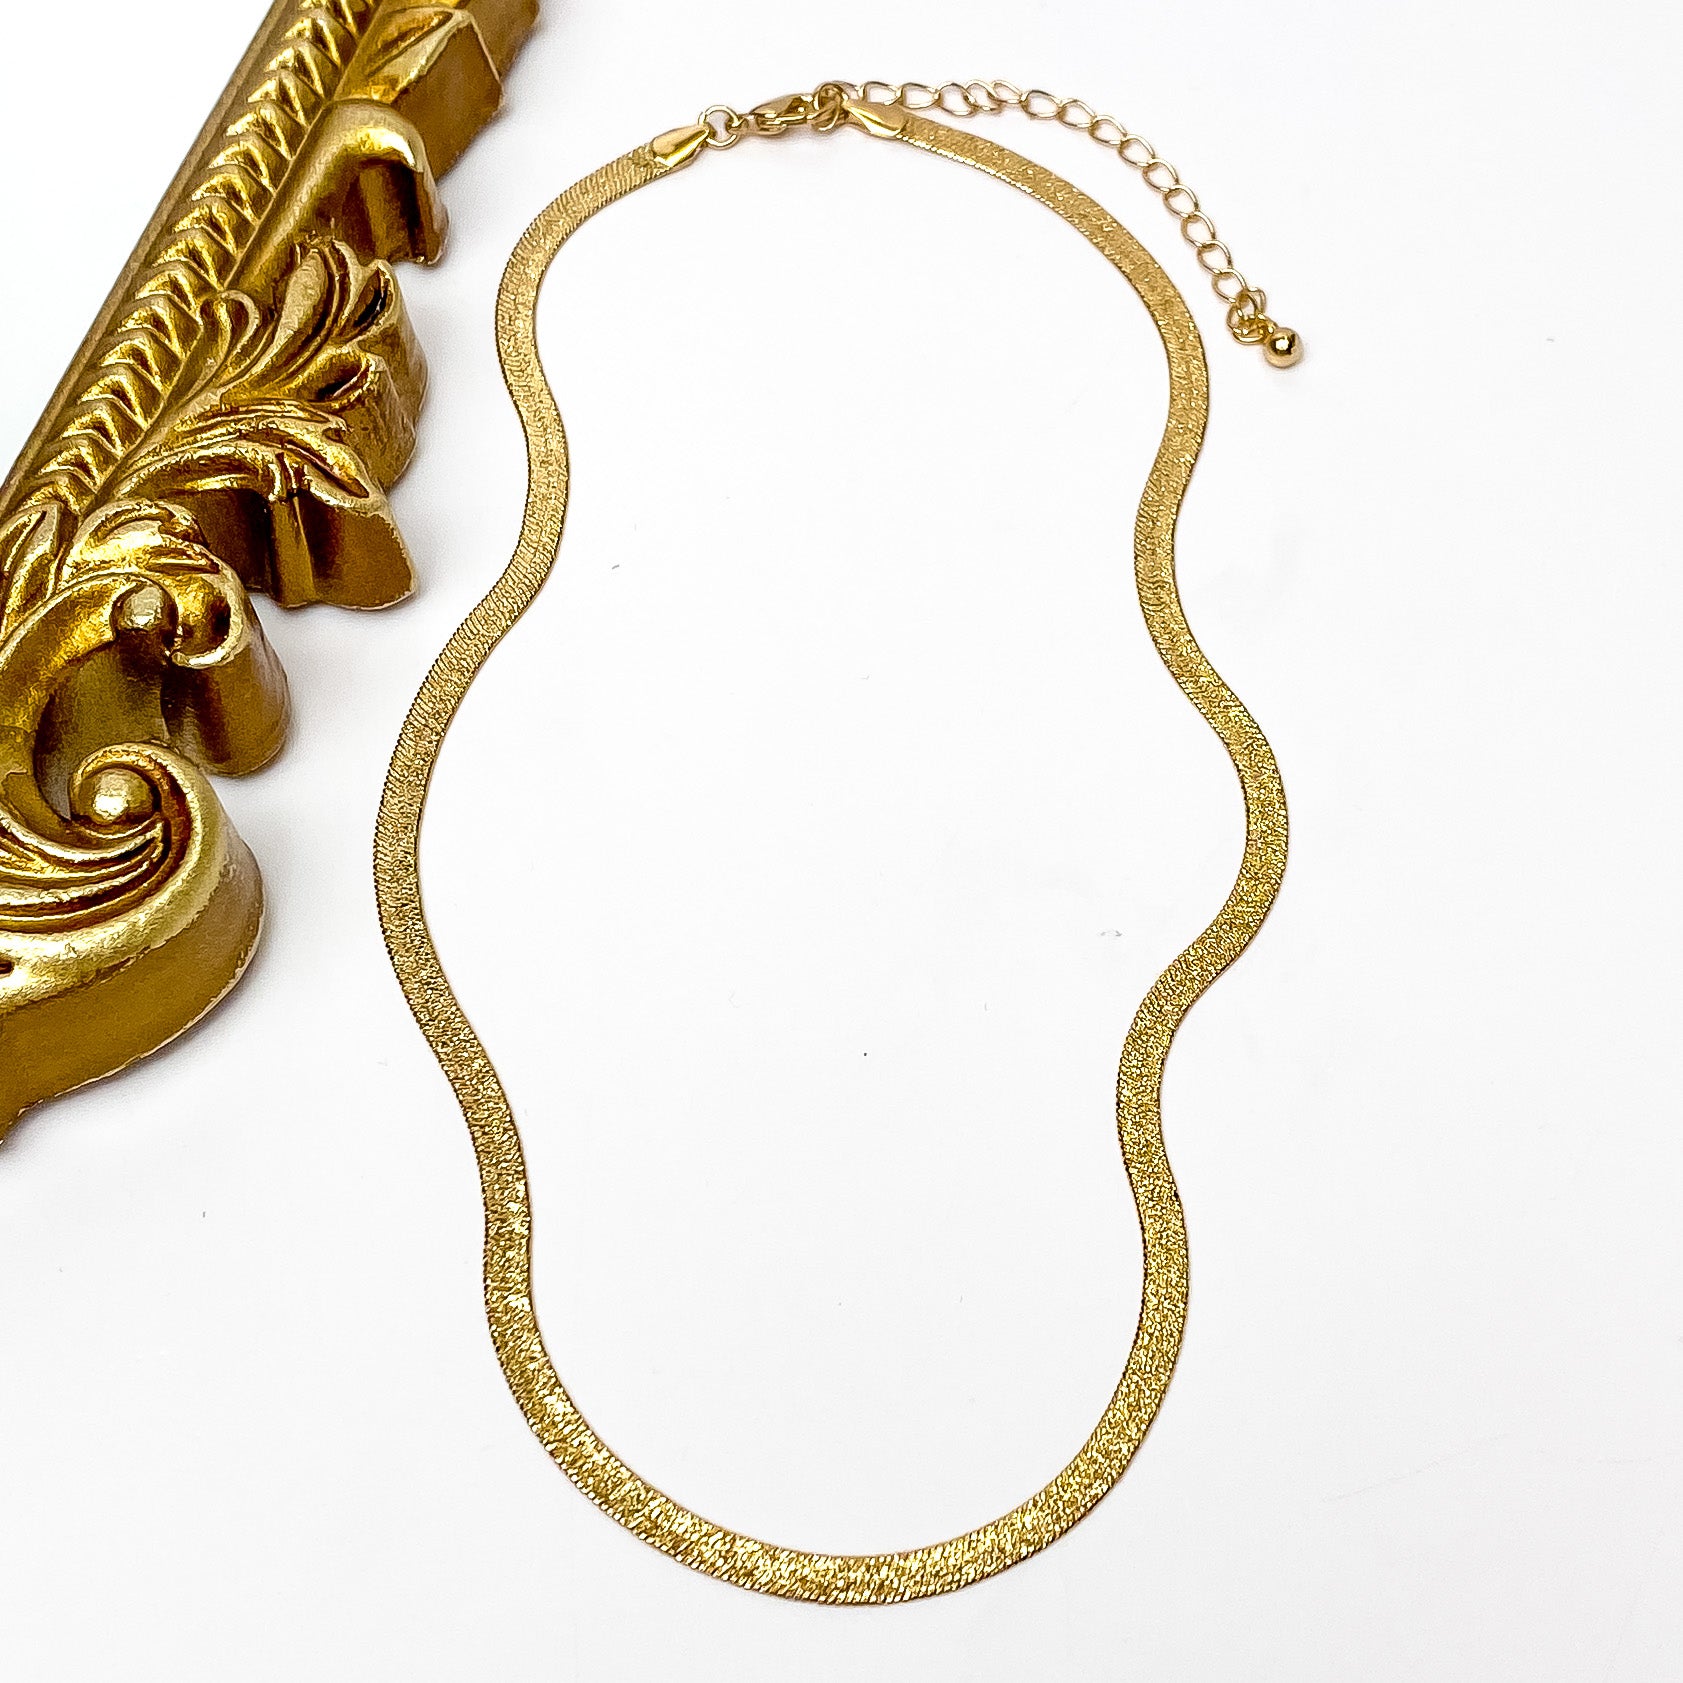 Gold herringbone chain necklace with a gold necklace adjuster. This necklace is pictured on a white background with a gold mirror on the left side. 